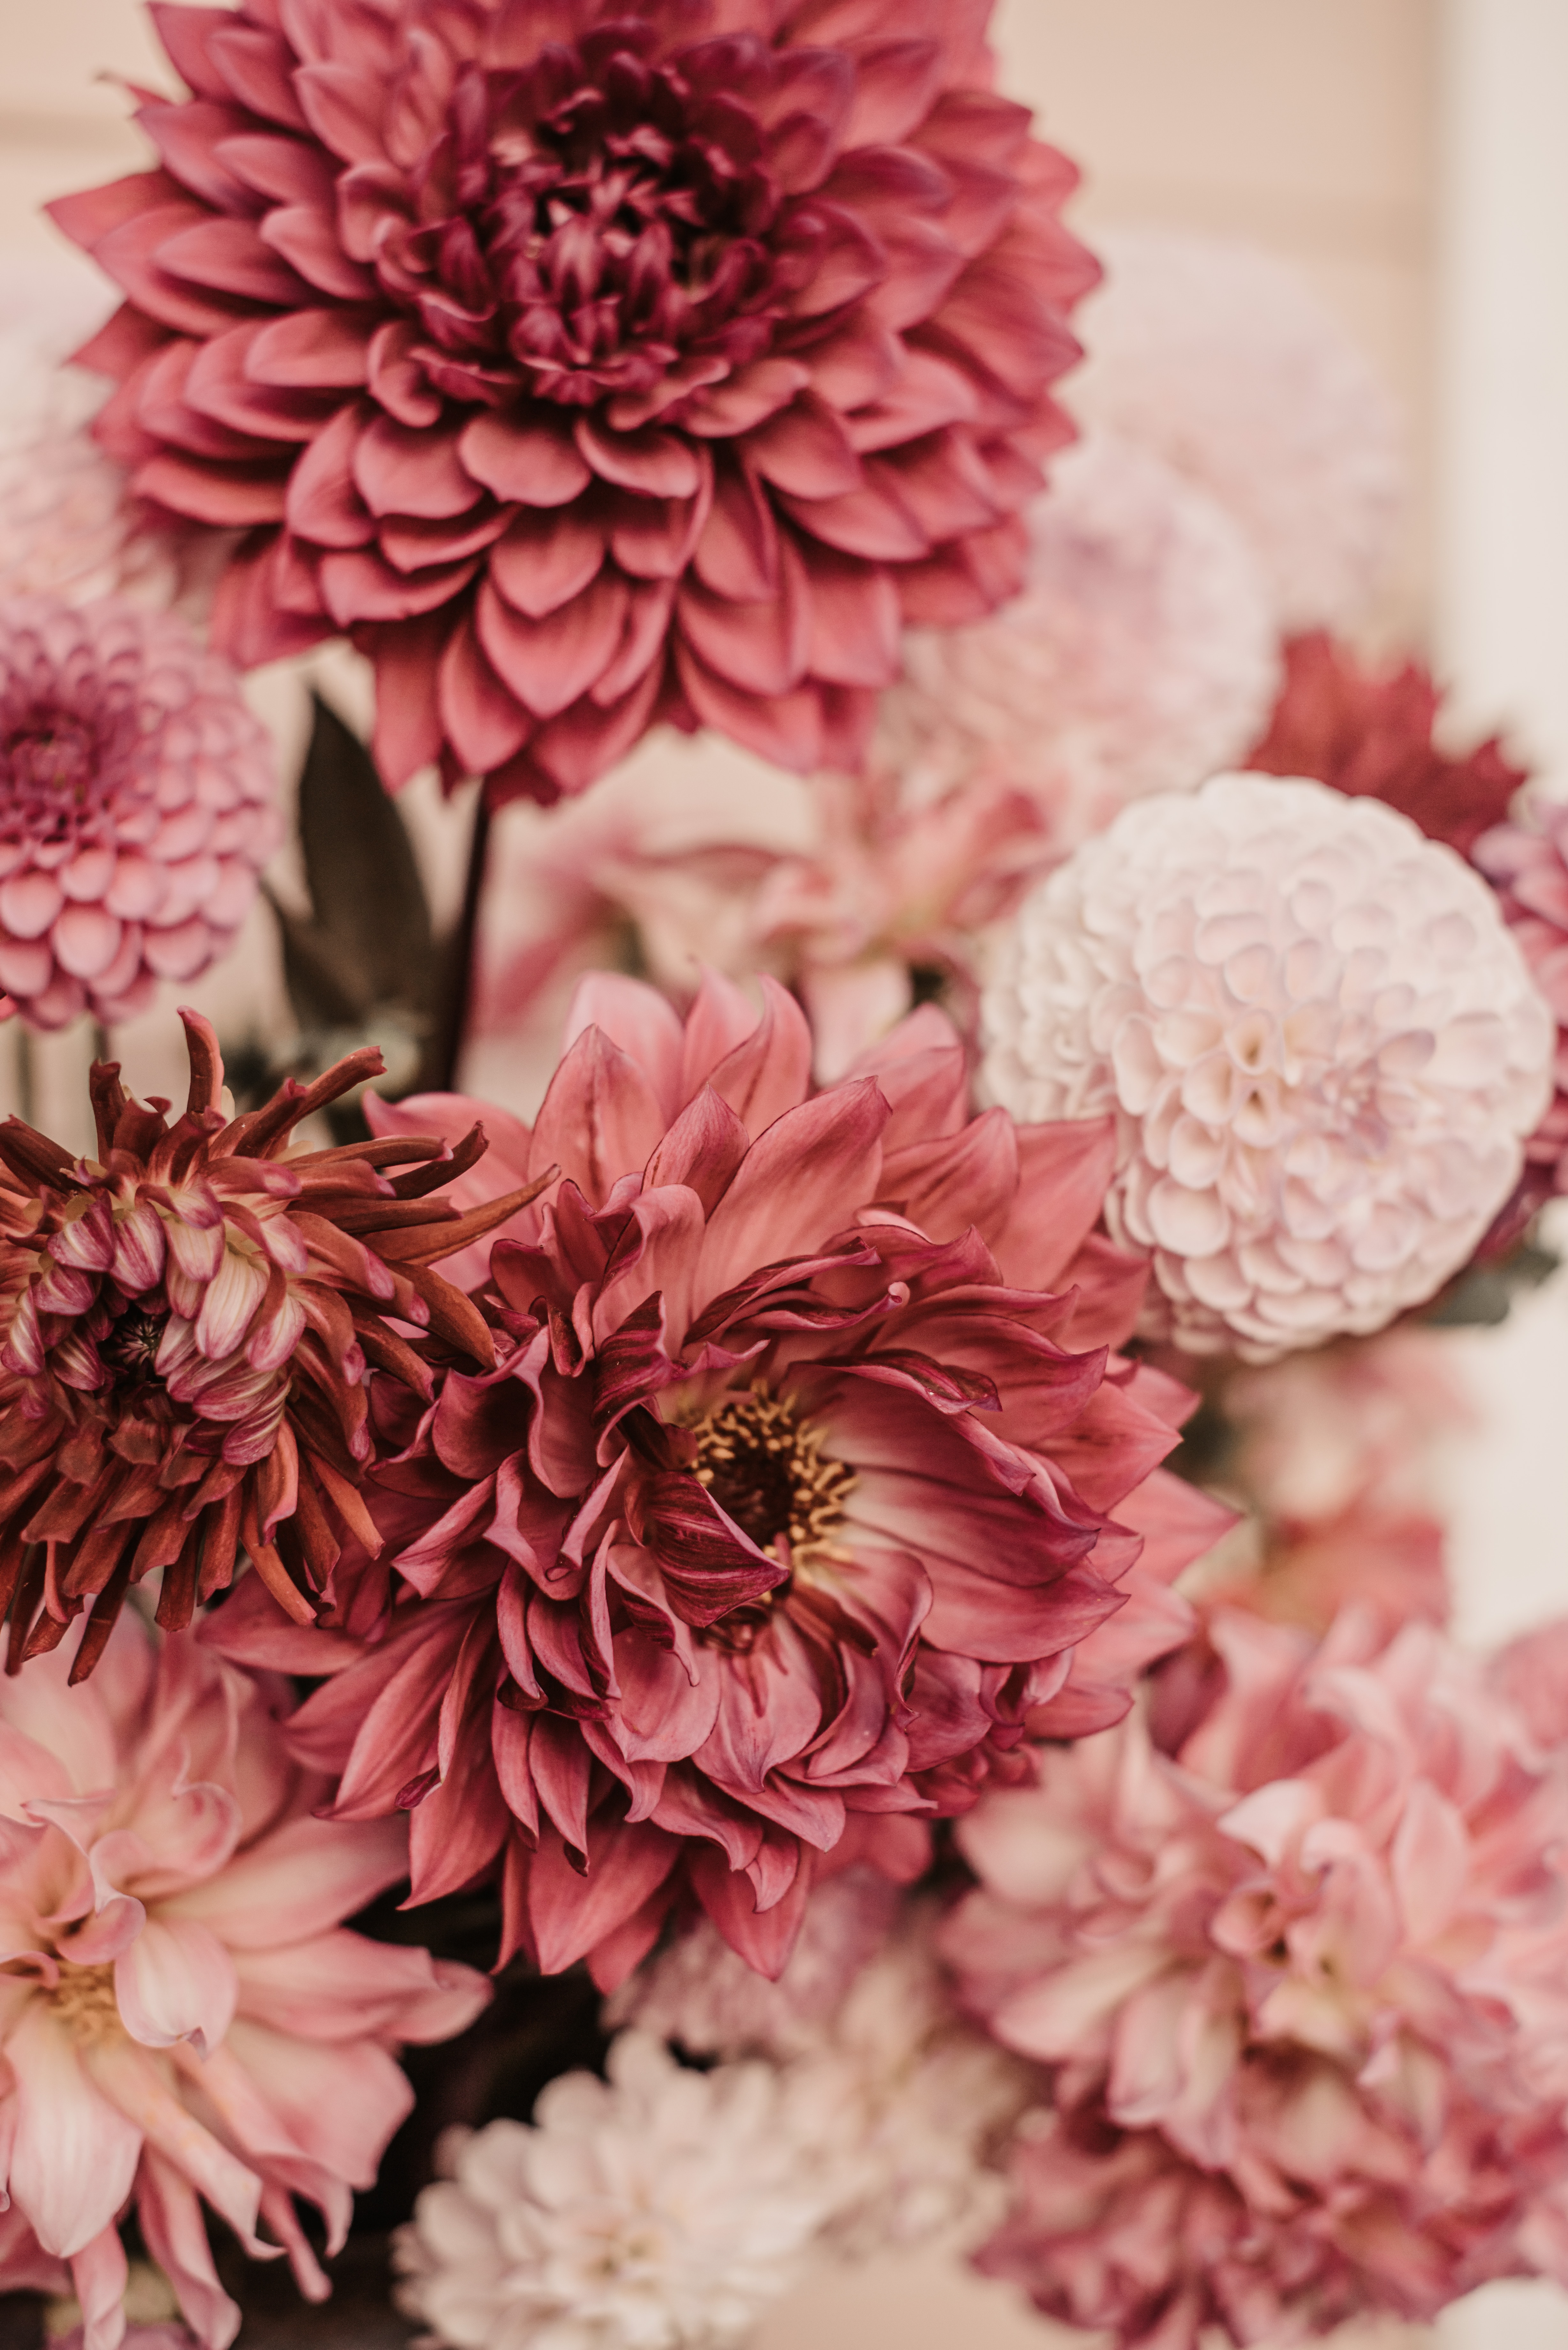 55967 free wallpaper 320x480 for phone, download images dahlias, pink, flowers, bouquet 320x480 for mobile